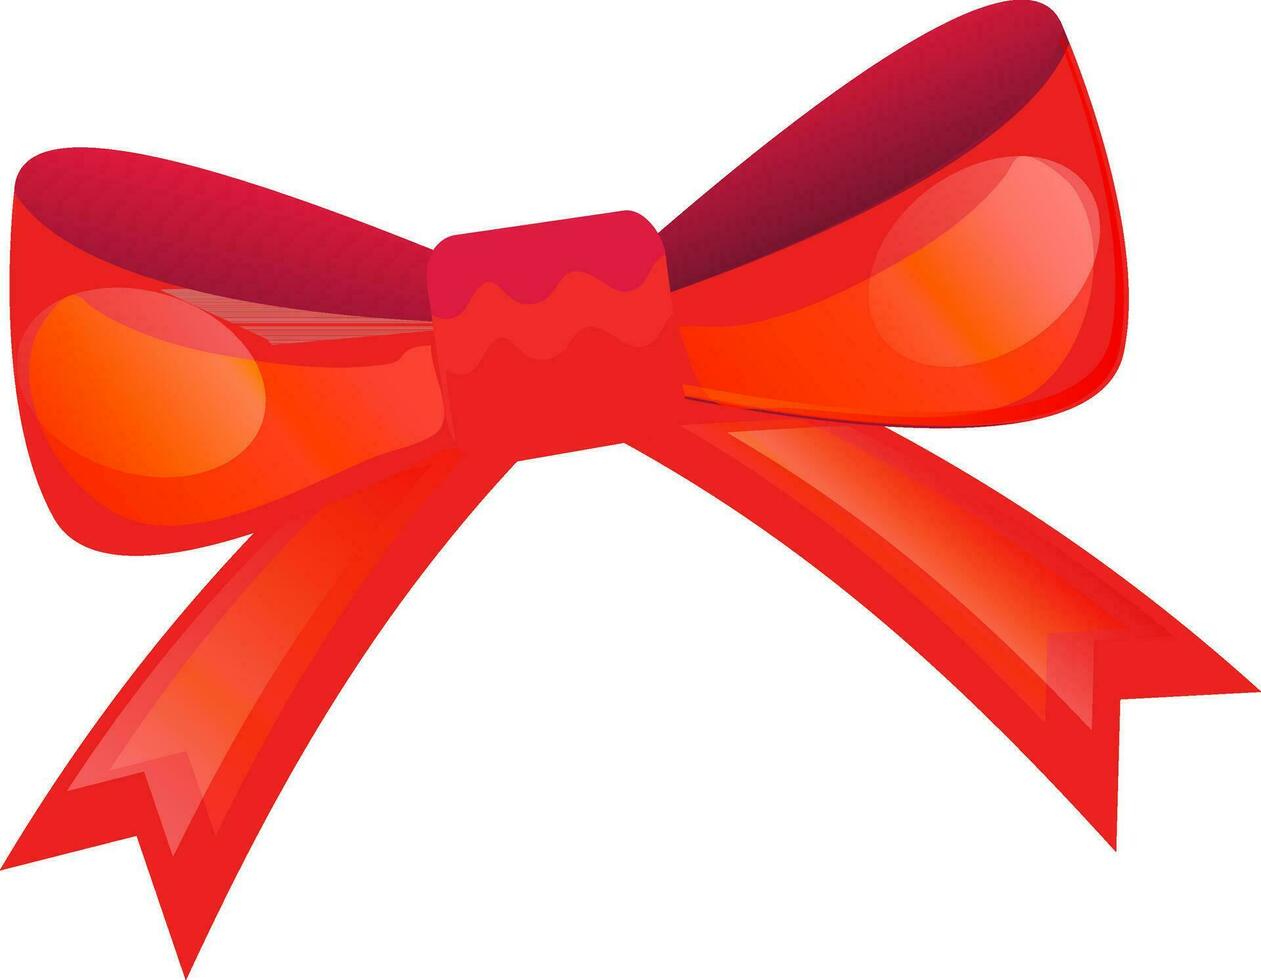 Illustration of red ribbon bow. vector